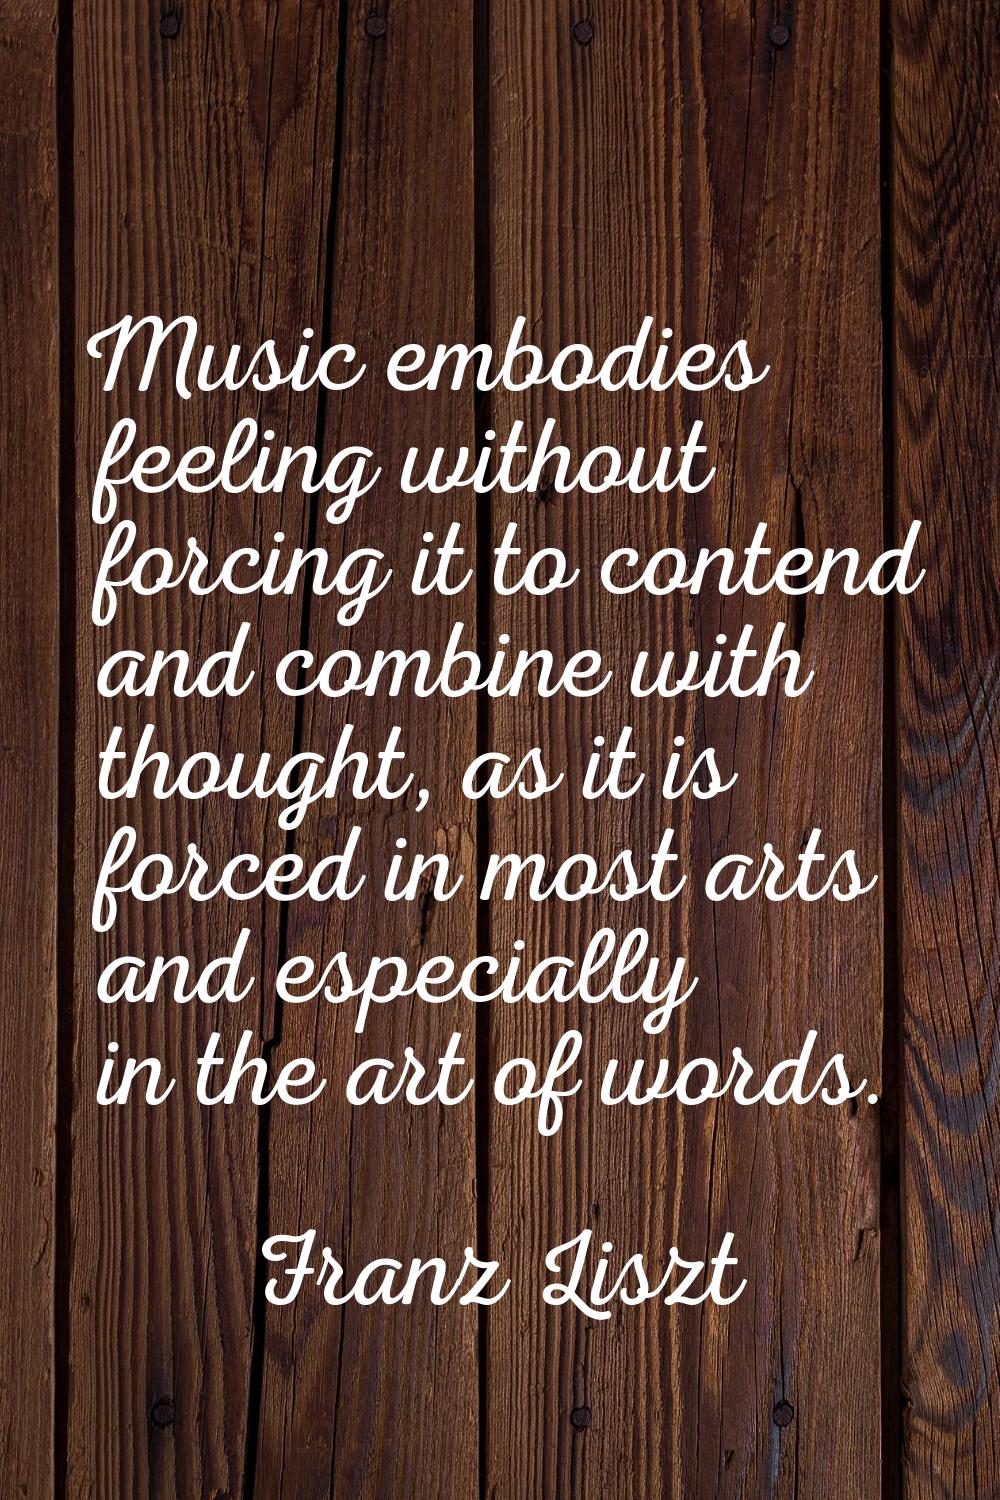 Music embodies feeling without forcing it to contend and combine with thought, as it is forced in m